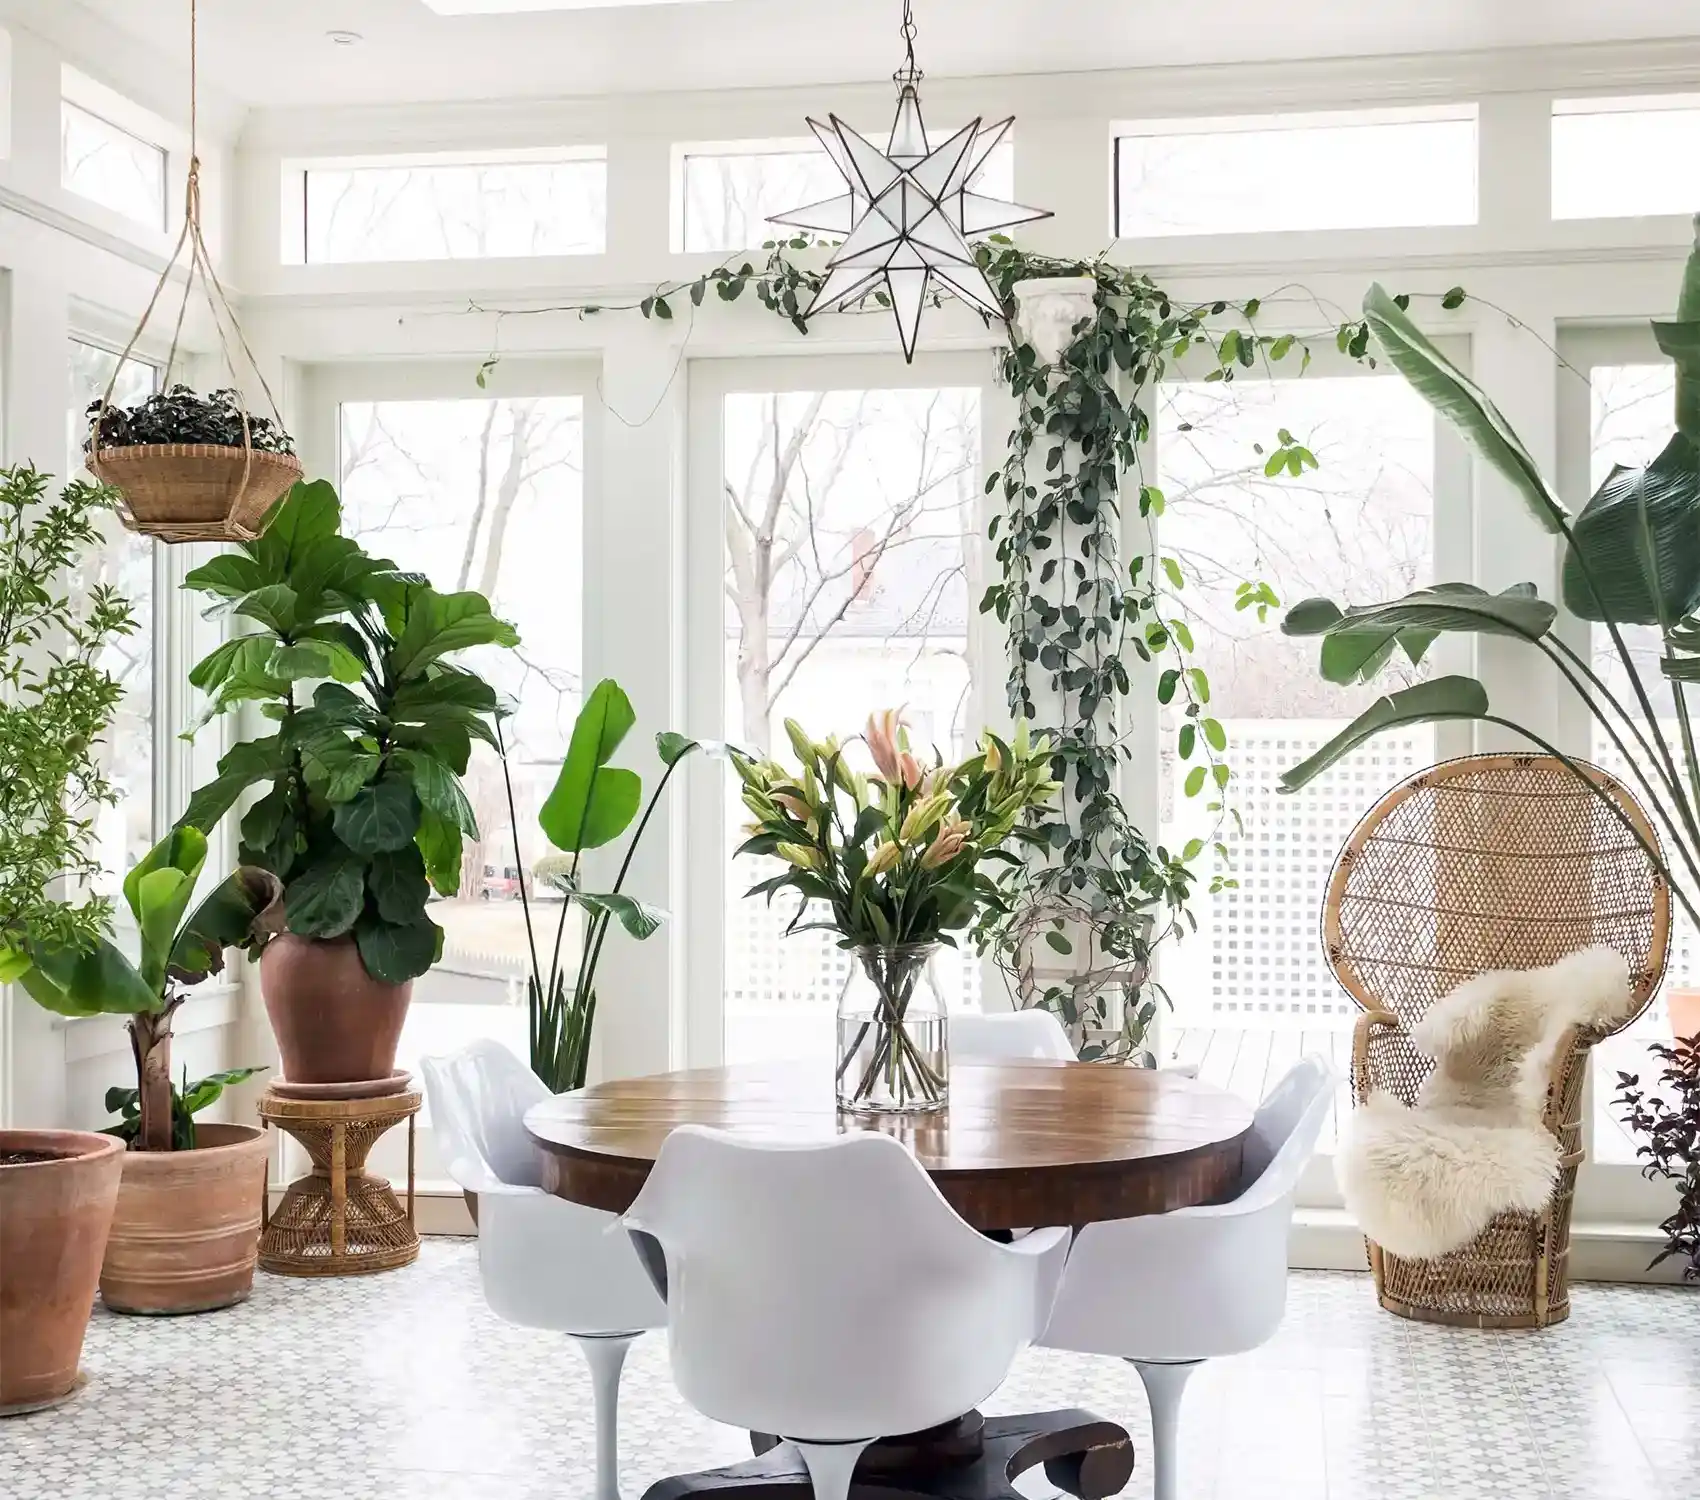 sunroom contractors Avon-by-the-Sea NJ, white sunroom with huge windows and lots of plants